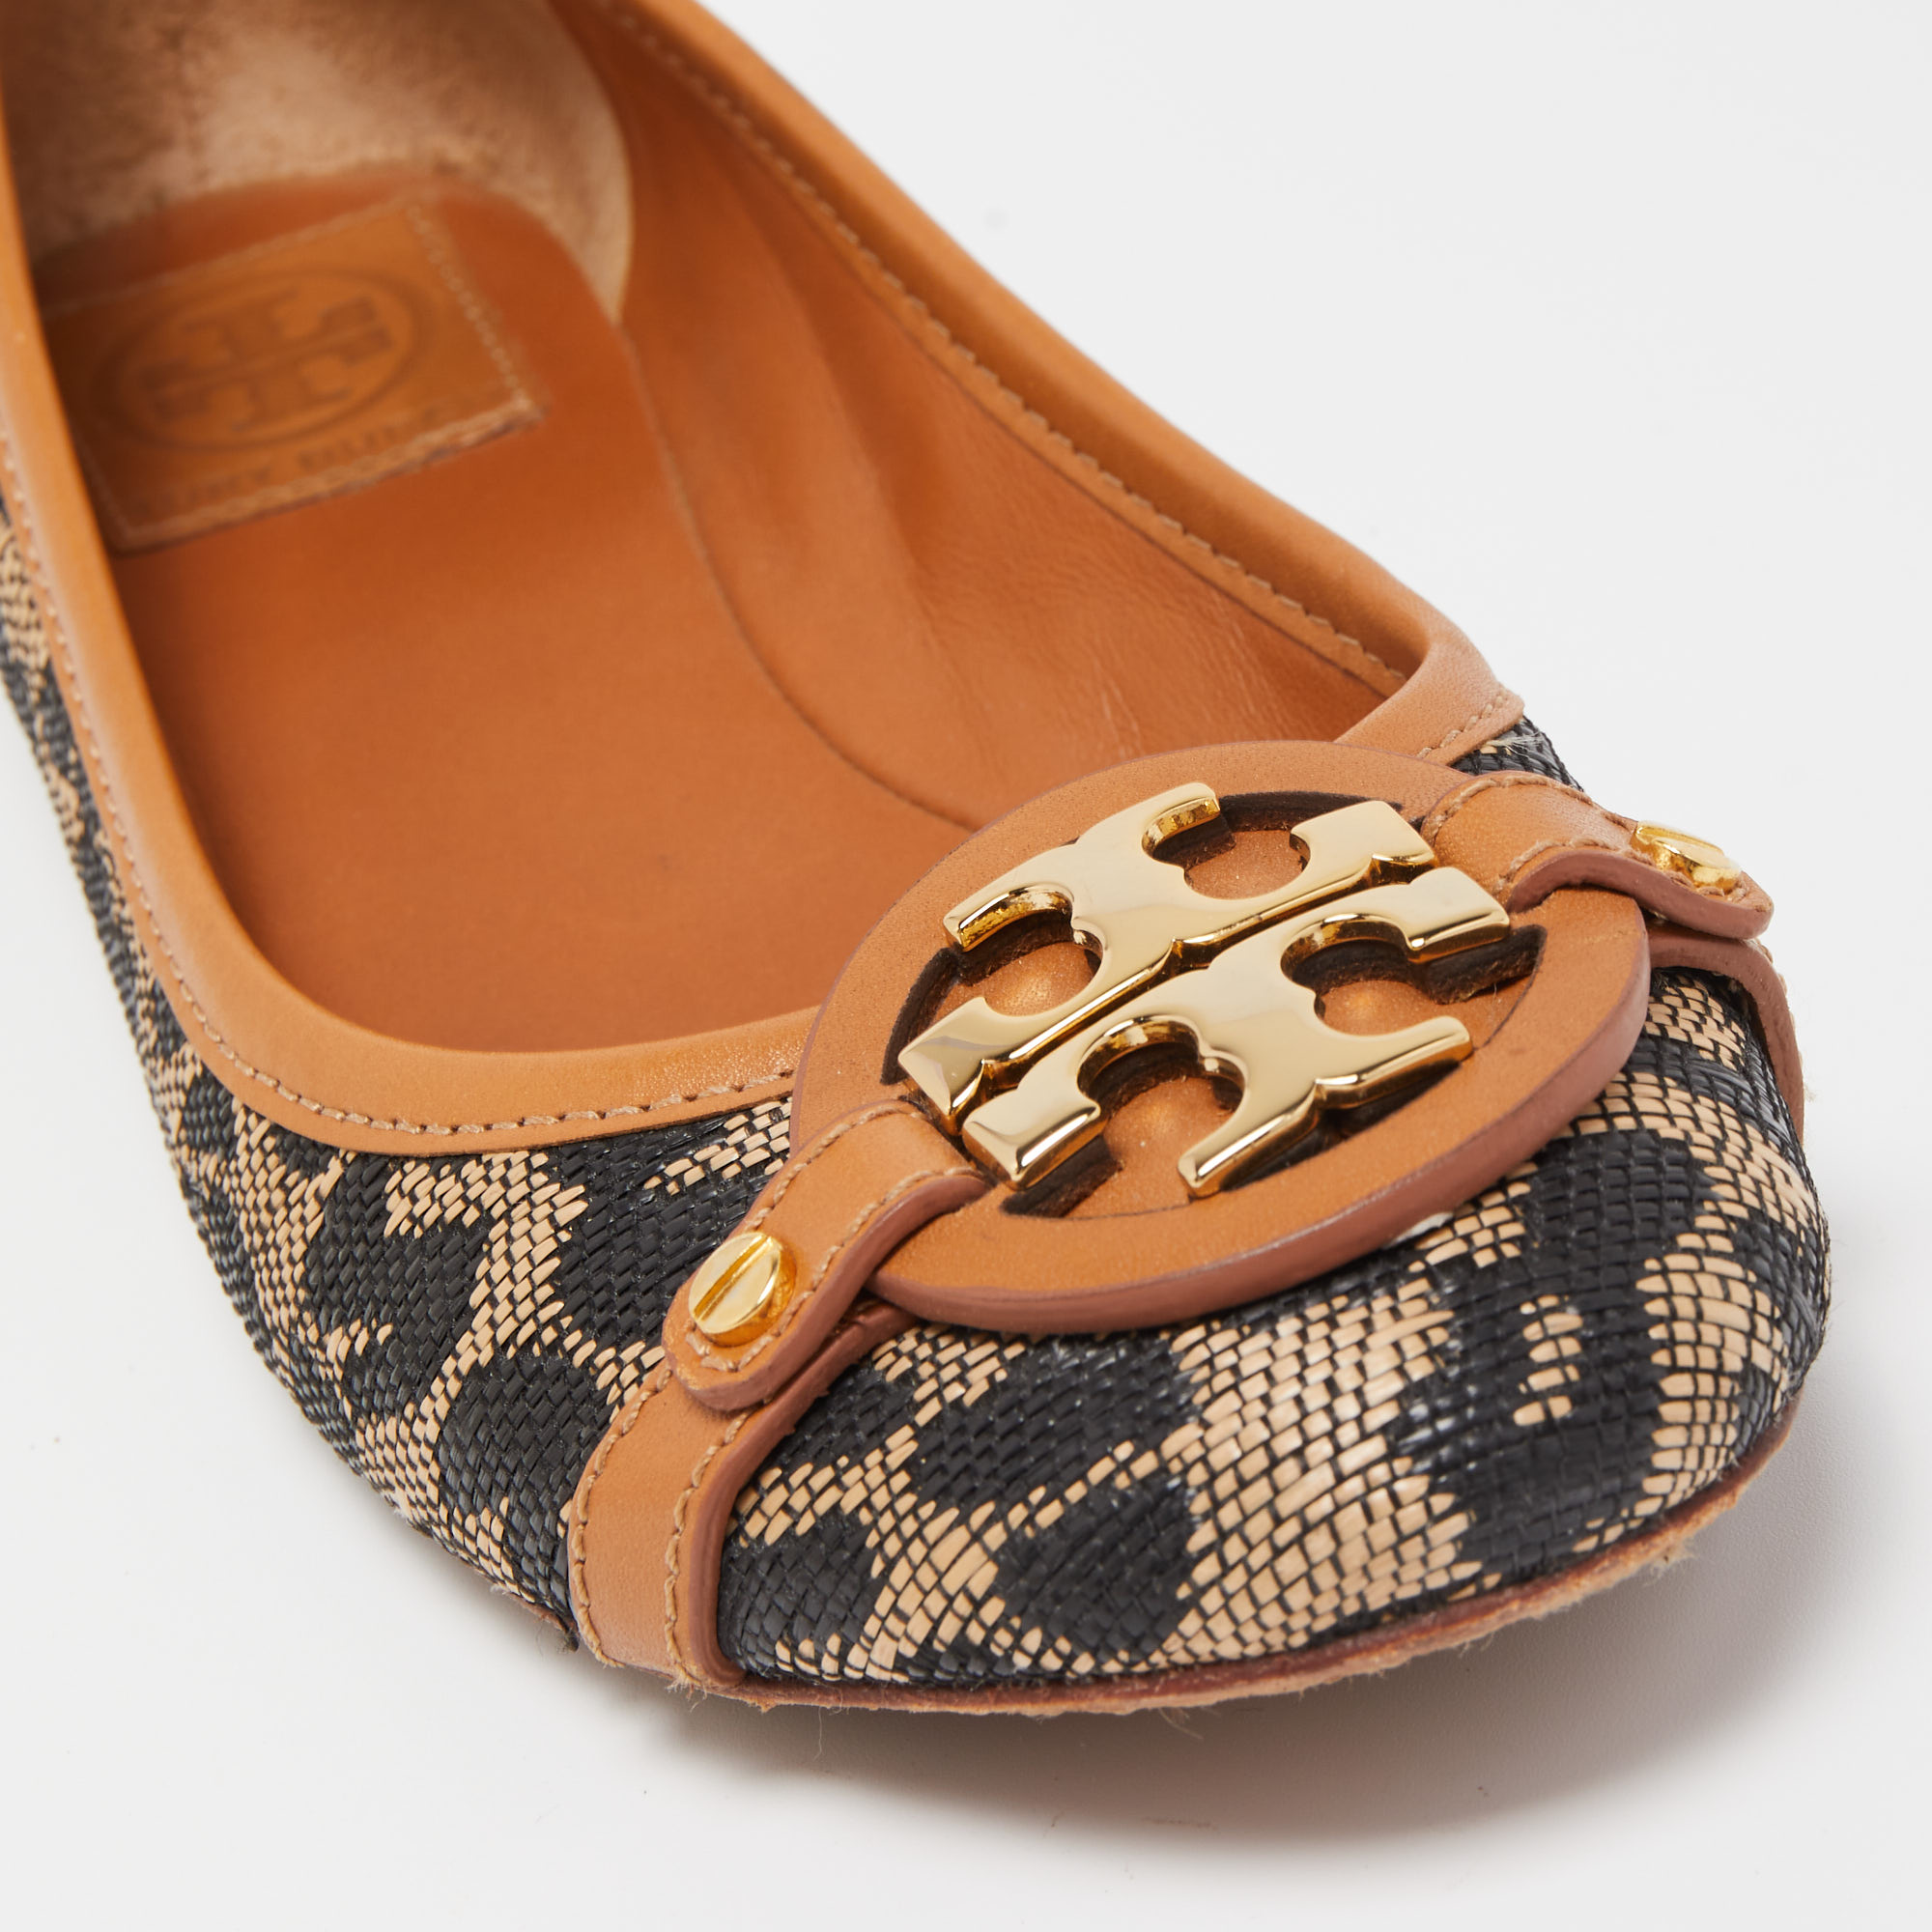 Tory Burch Black/Brown Printed Straw And Leather Aaden Ballet Flats Size 38.5